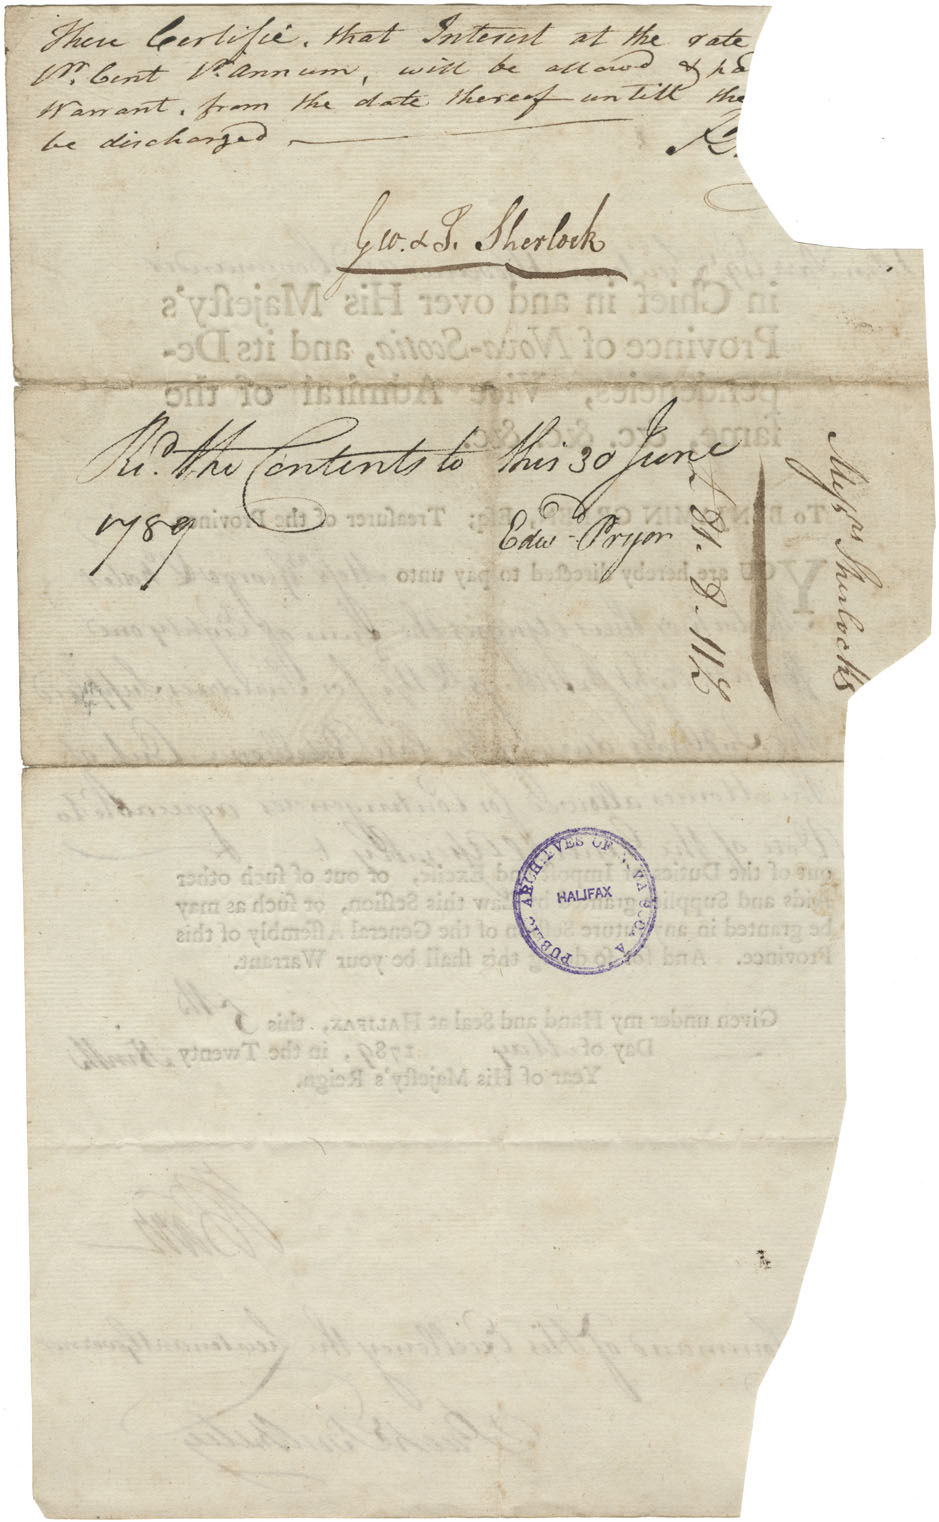 Directive from Lieutenant-Governor John Parr to Benjamin Green, Treasurer of the Province, for payment to George & Foster Sherlock for sundries supplied to the Mi'kmaq during the late rebellion.